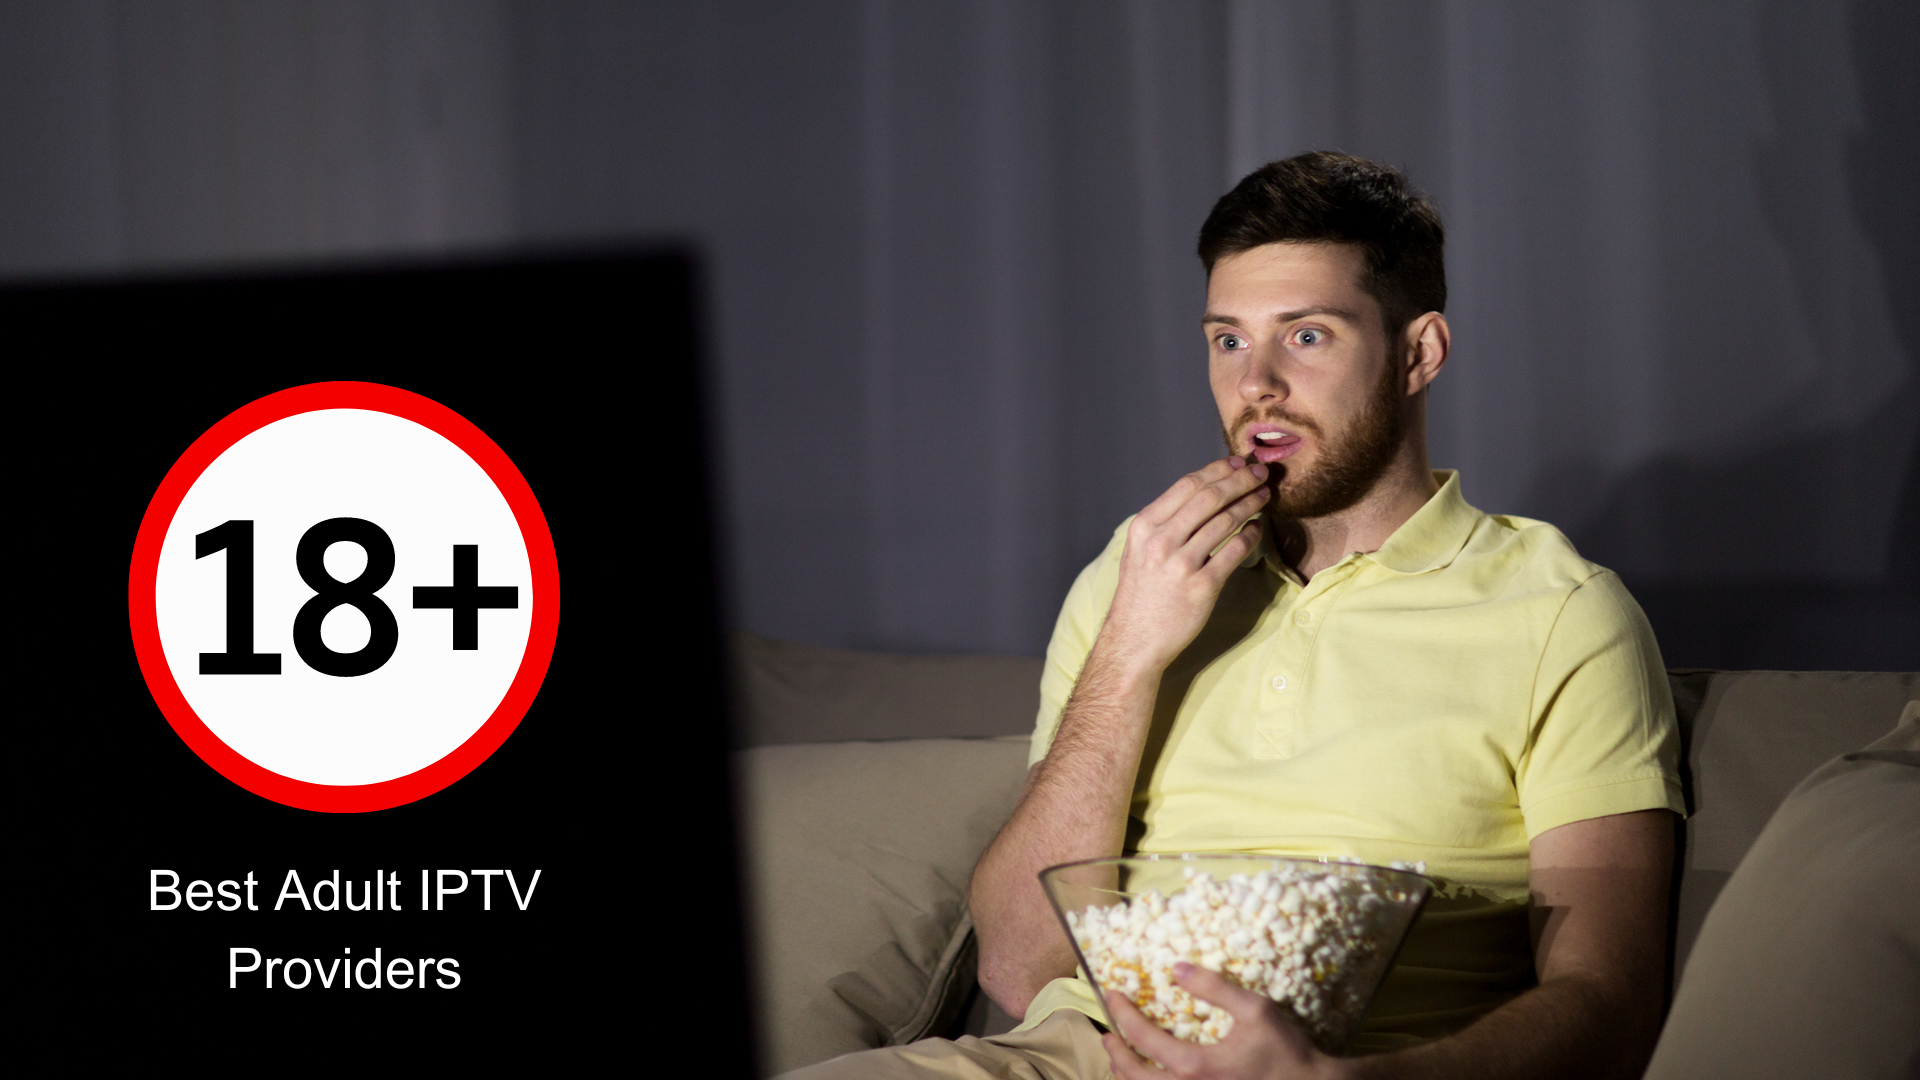 The Best Adult IPTV Providers: The Complete Guide